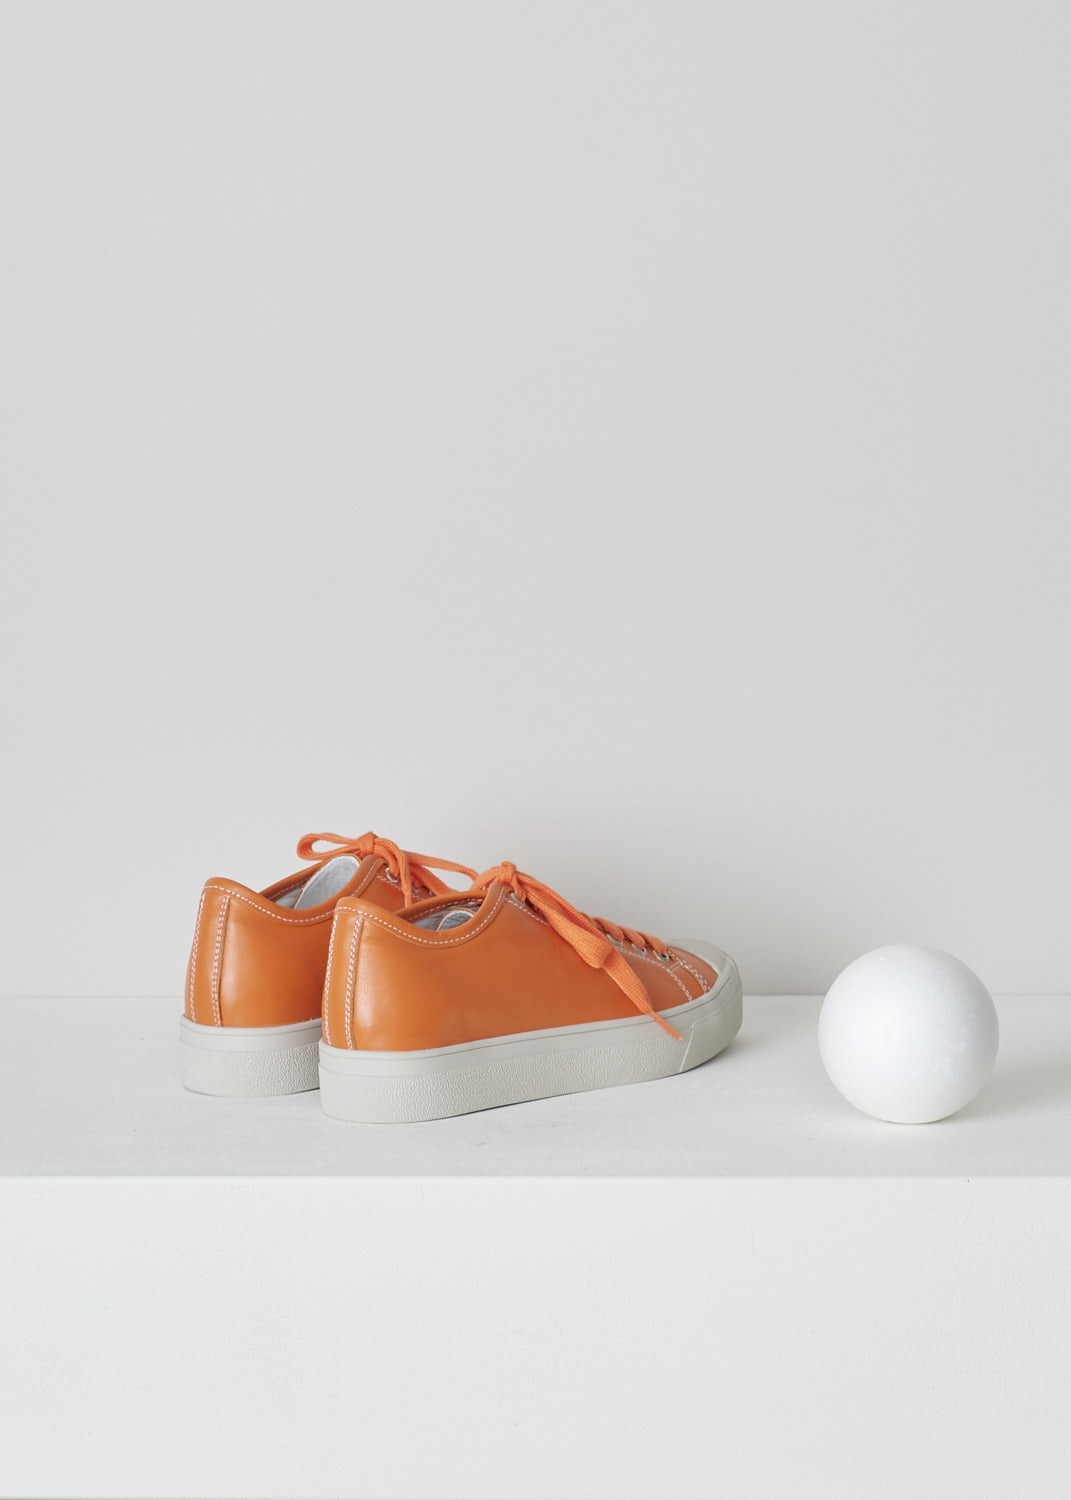 SOFIE Dâ€™HOORE, ORANGE LEATHER SHOES, FOLK_LMAST_LMAST_ORANGE, Orange, Back, These orange leather sneakers feature a front lace-up closure with orange laces. These sneakers have a round toe with a white rubber toe cap that goes down into the white rubber sole. Contrasting white stitching is used throughout. The sneakers come with an additional pair of white laces.
